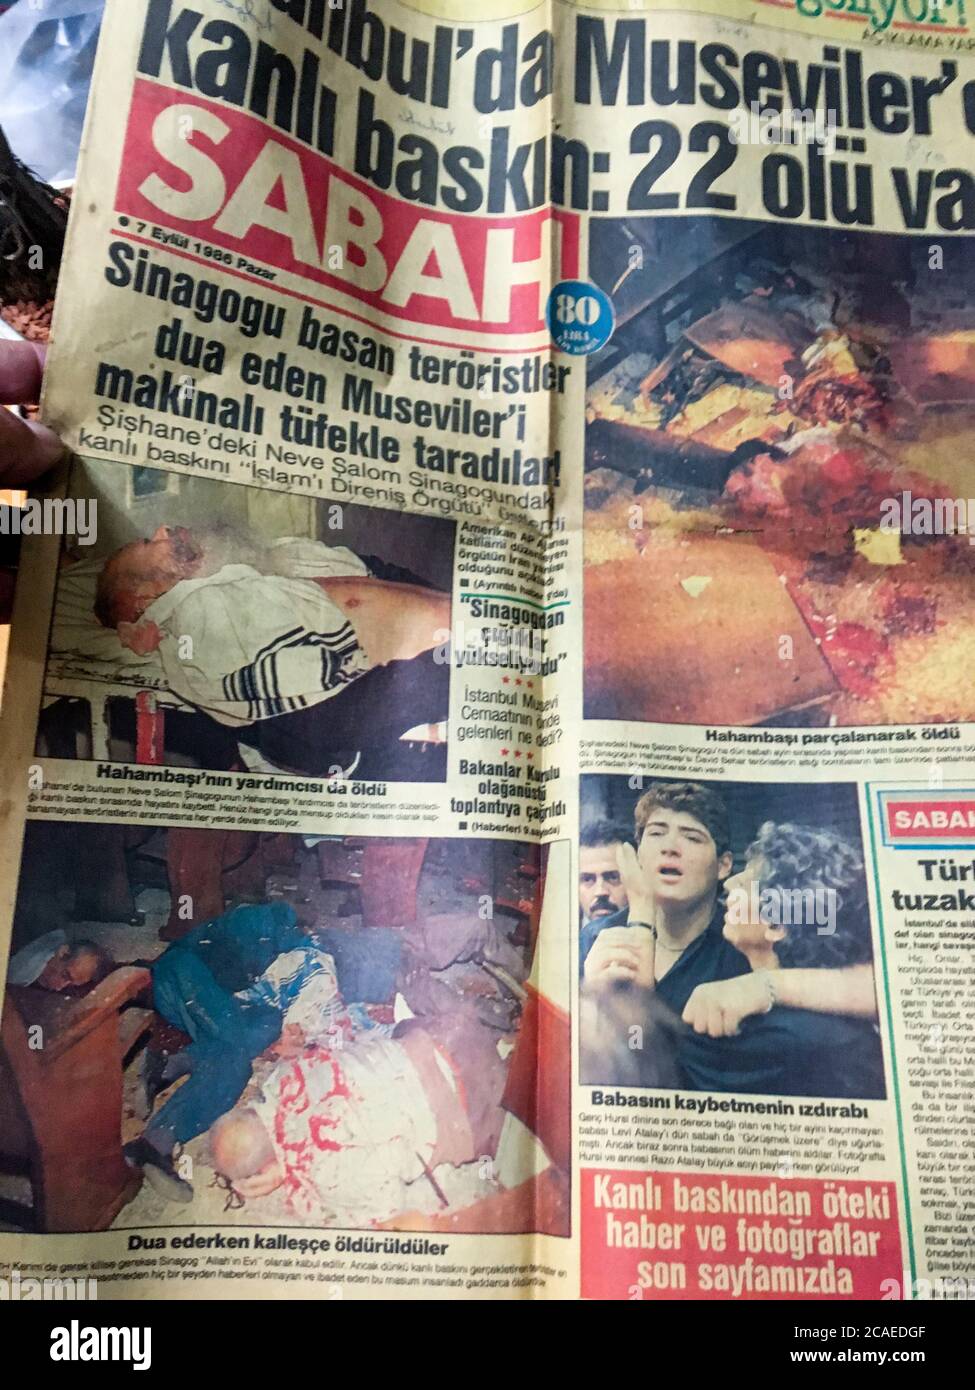 Frontpage of Sabah, Turkish newspaper, Terror attack at Istanbul synagogue, September 6th 1986, Istanbul, Turkey Stock Photo